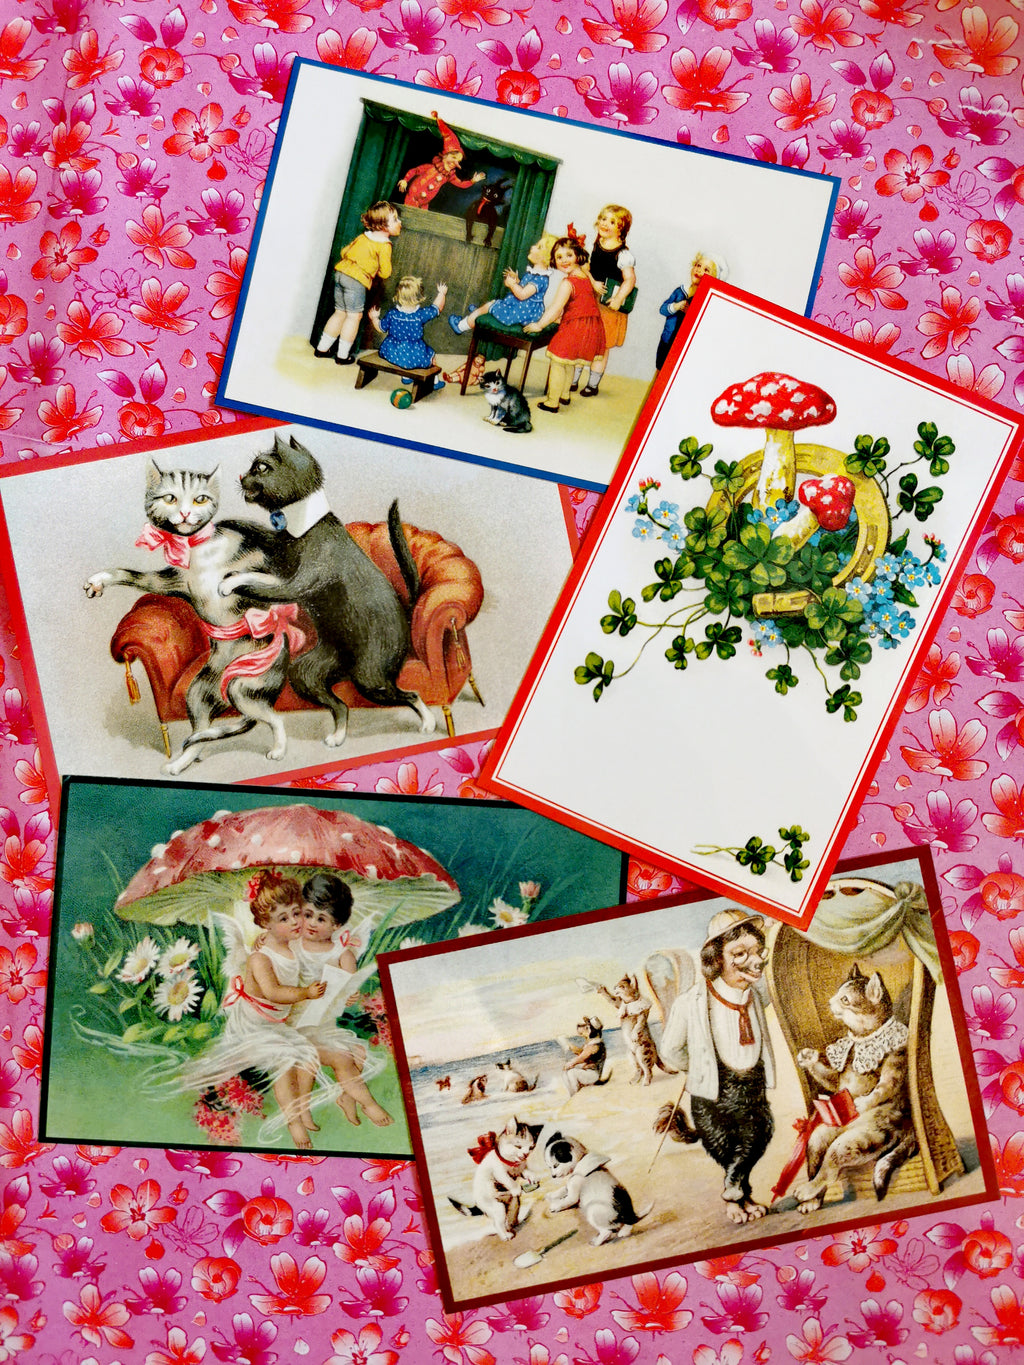 Set of 5 beautifull postcards with images taken from vintage (1910-1930) German illustrations of Punch and Judy, toadstools and cats, all our favourites!! 

Postcards come with envelopes.

 

